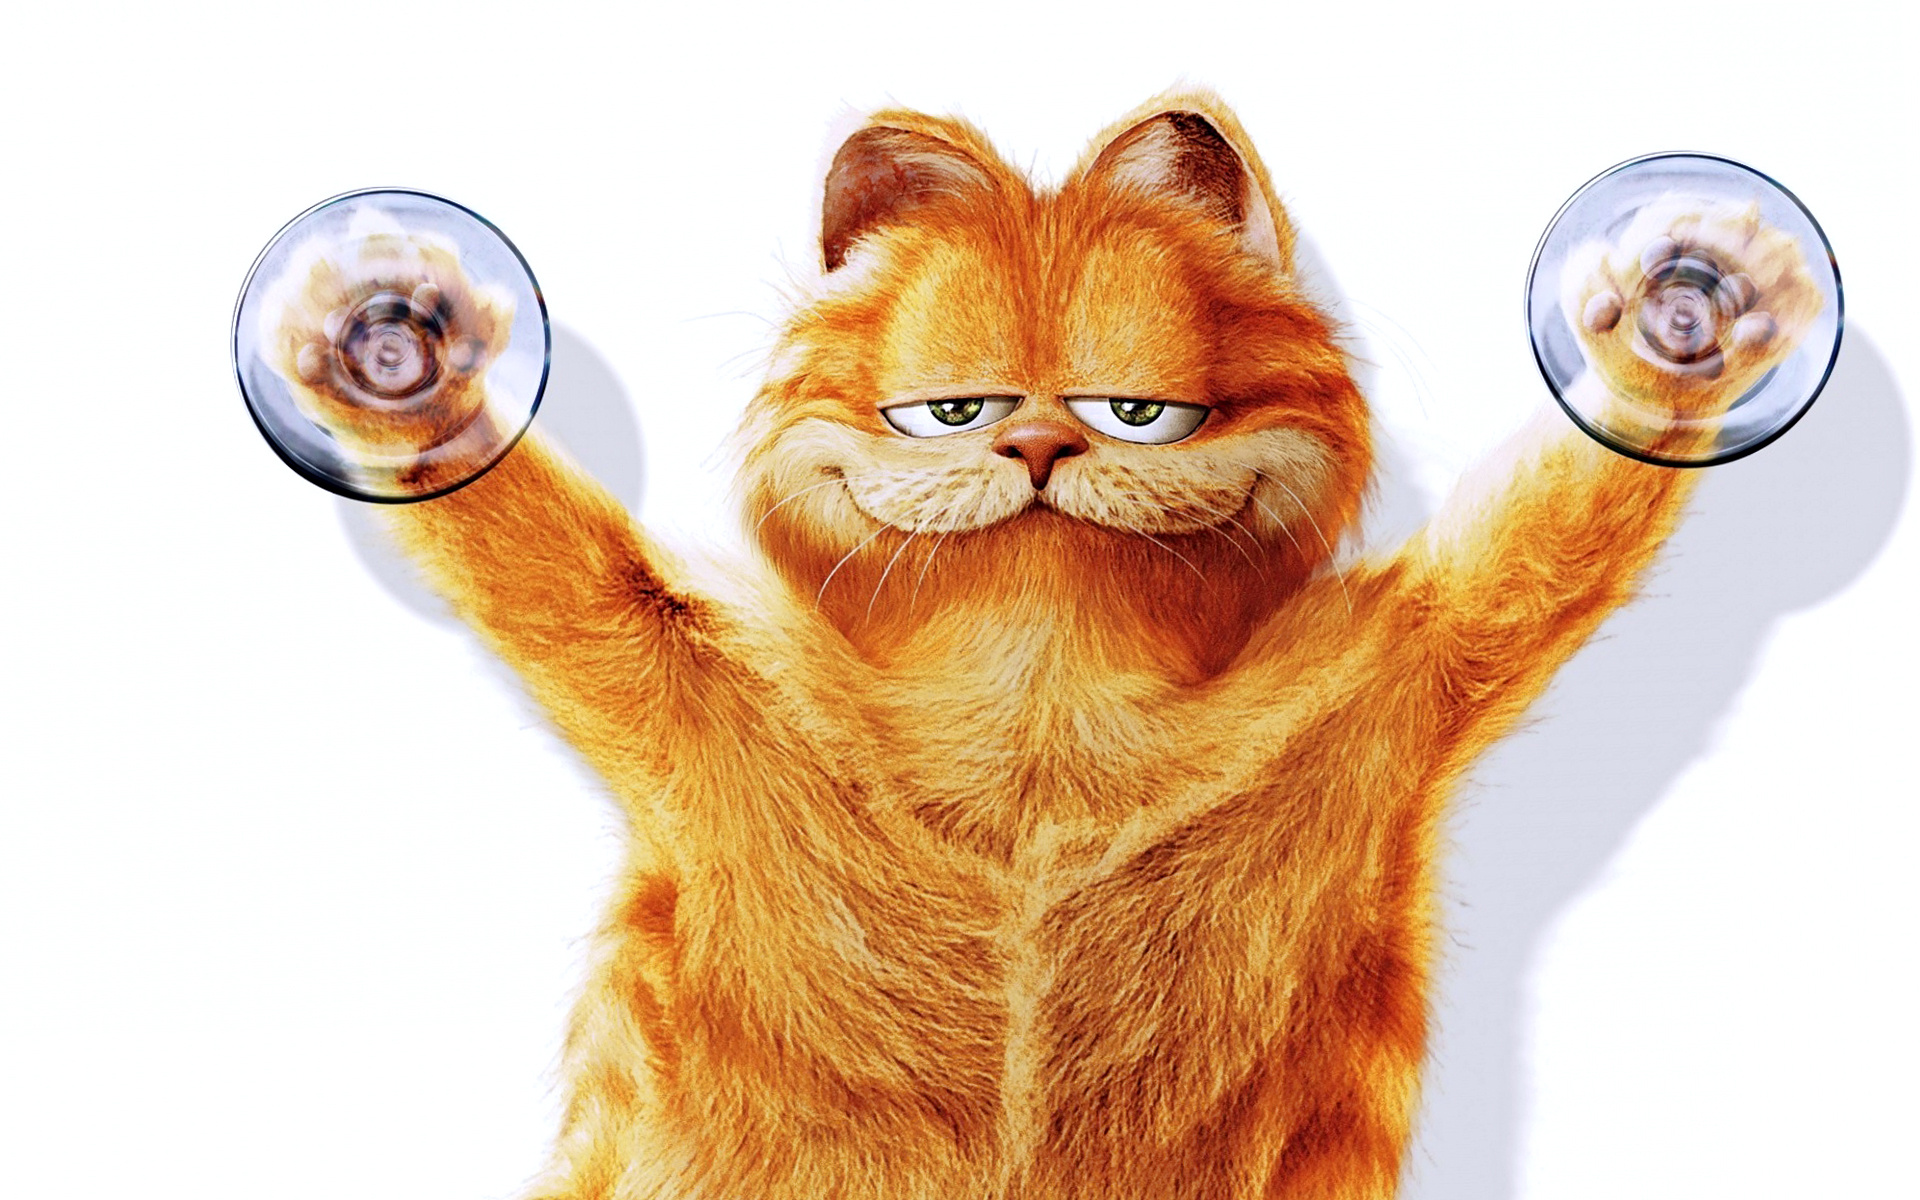 Garfield: One of the most popular and most merchandised comics characters in the world. 1920x1200 HD Wallpaper.